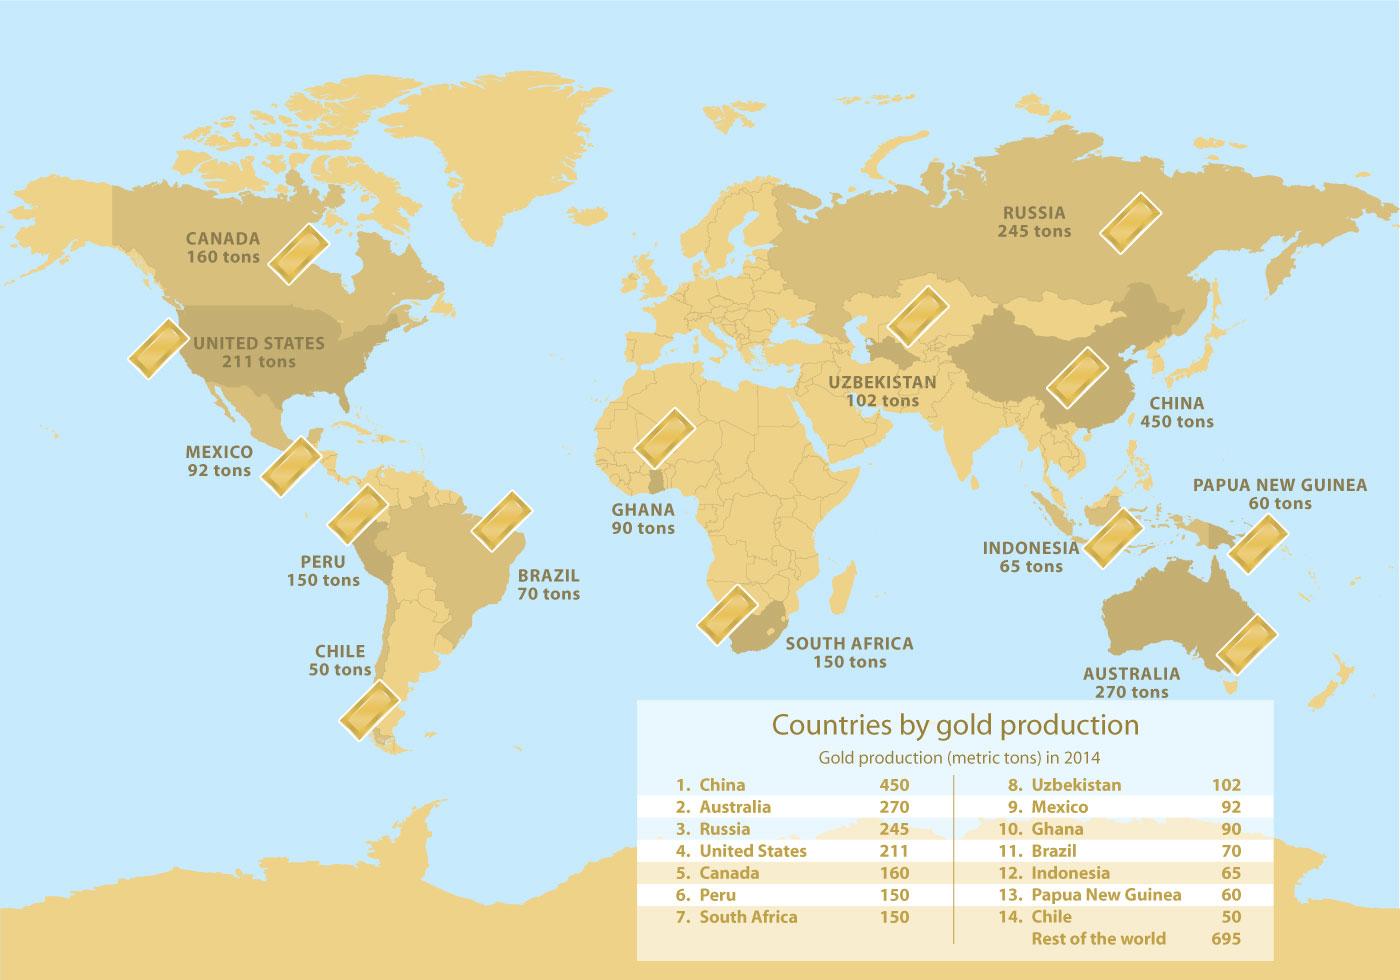 The world's gold. Gold World. New World майнинг карта. Map of the World in Gold.